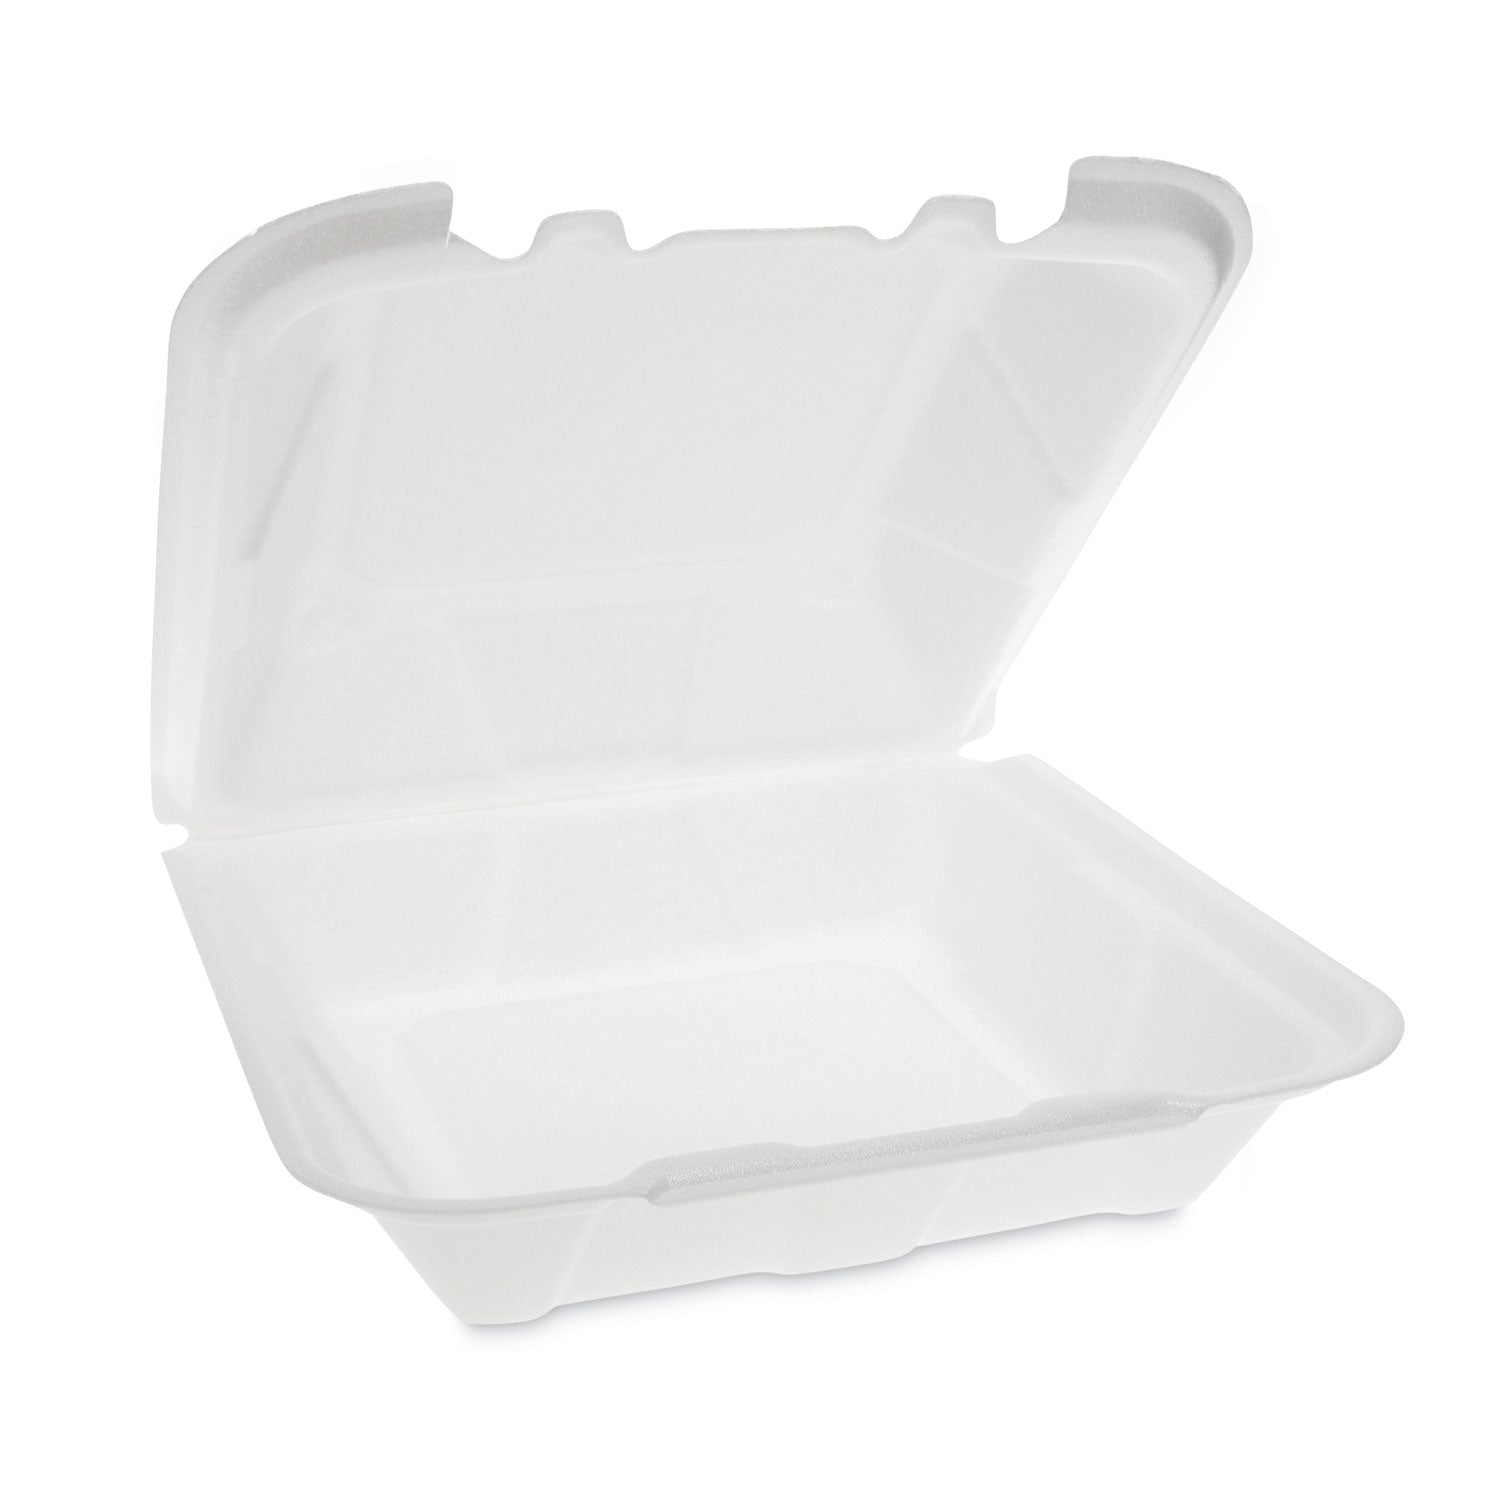 vented-foam-hinged-lid-container-dual-tab-lock-913-x-9-x-325-white-150-carton_pctytd199010000 - 2